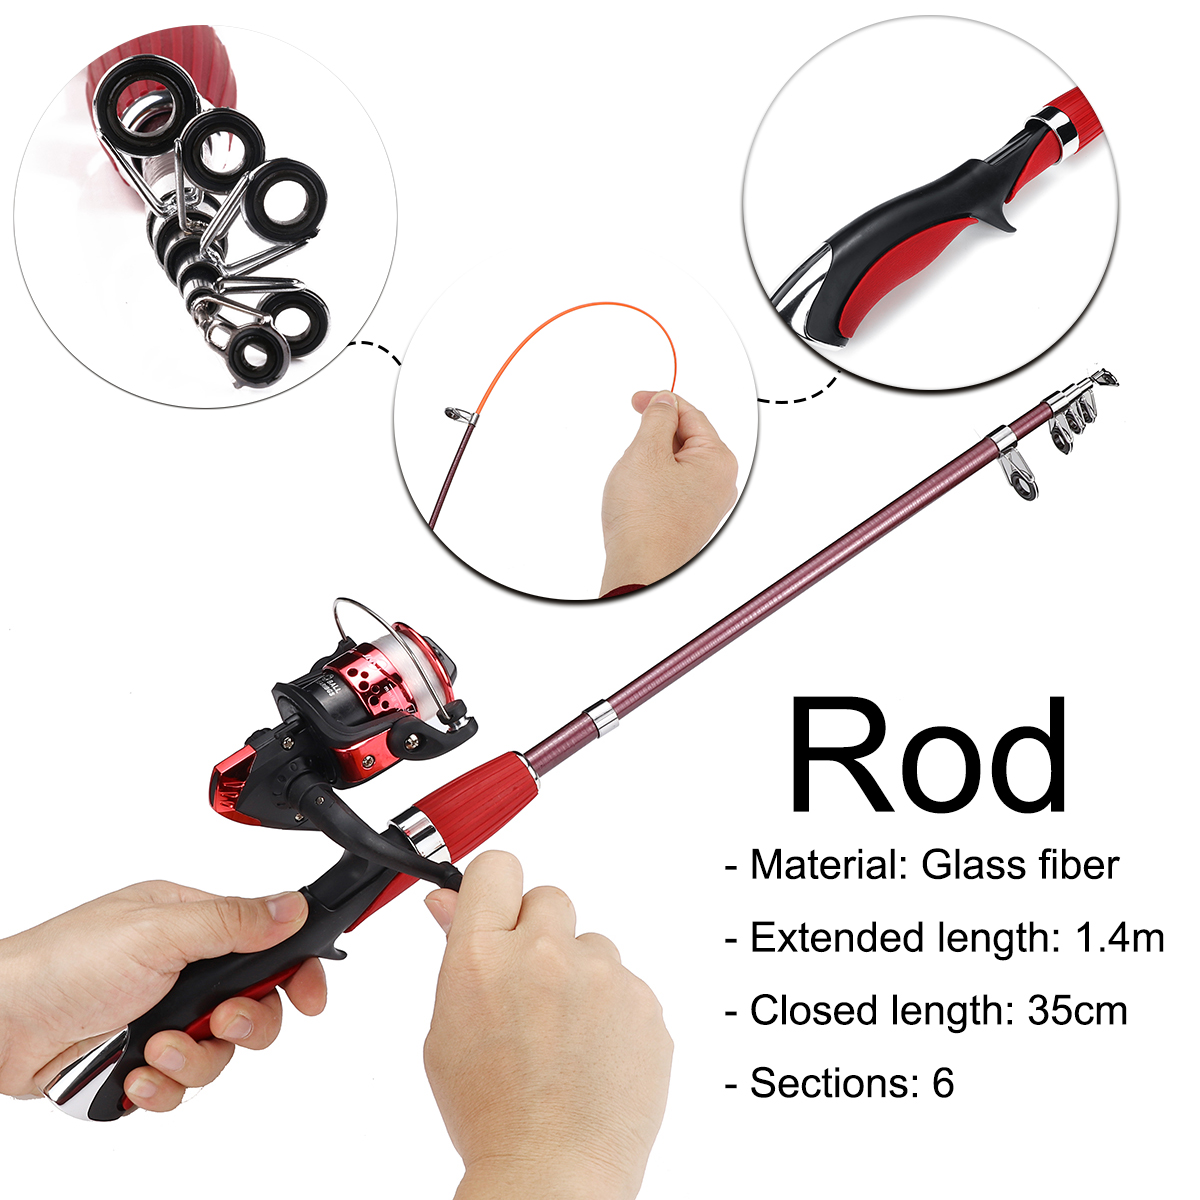 Carbon-Fiber-Telescopic-Fishing-Rod-amp-Spinning-Reel-Combo-Kit-with-Fishing-Line-1589038